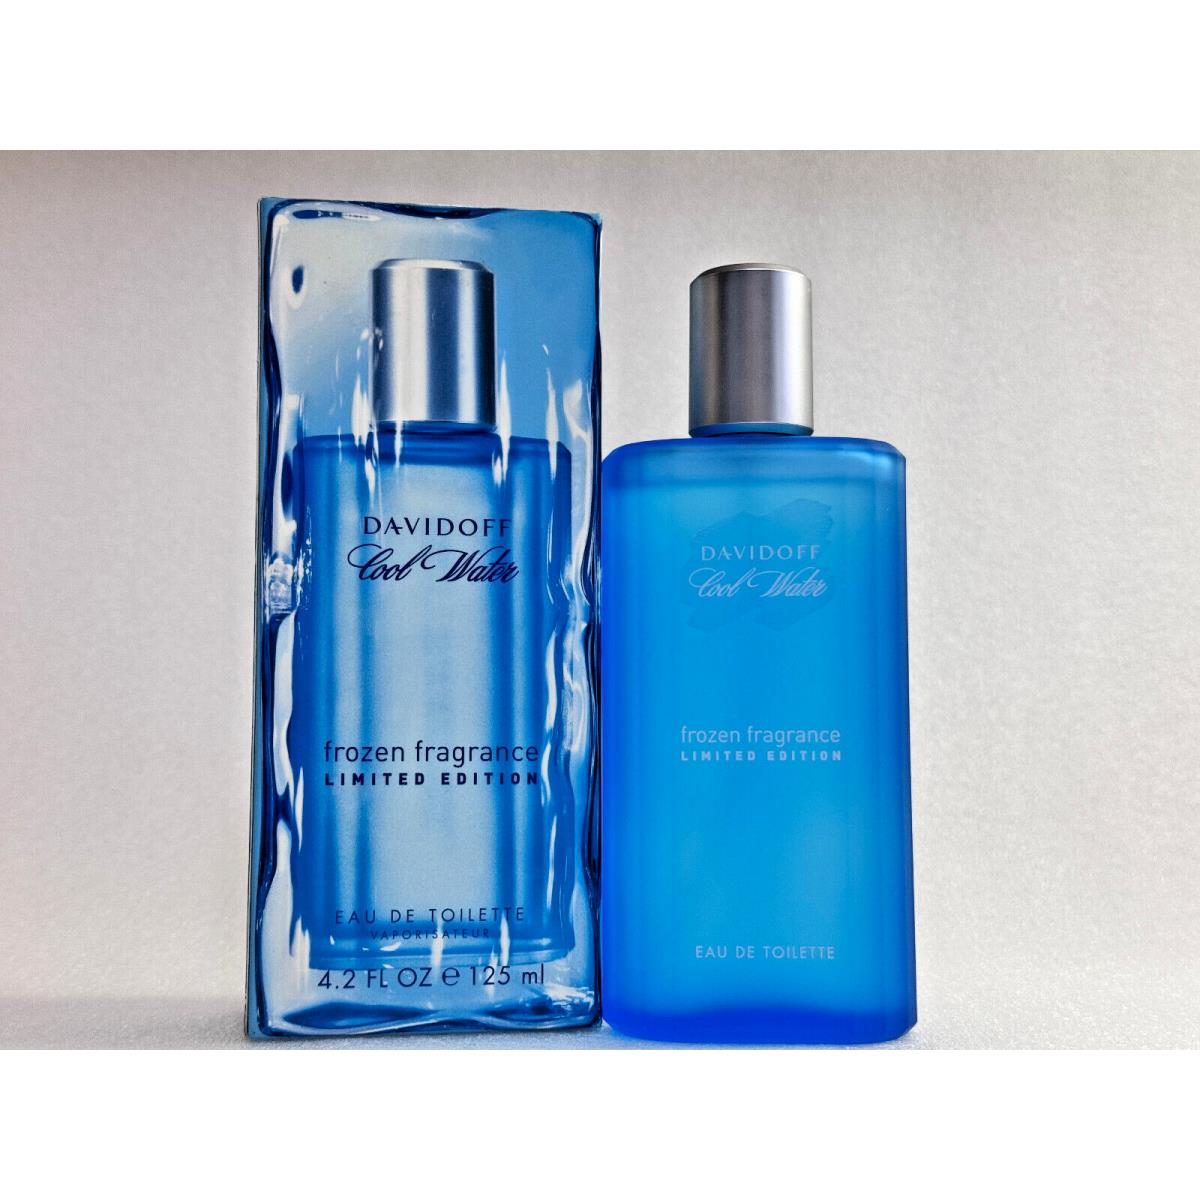 Davidoff Cool Water Frozen Fragrance Limited Edition 4.2 oz